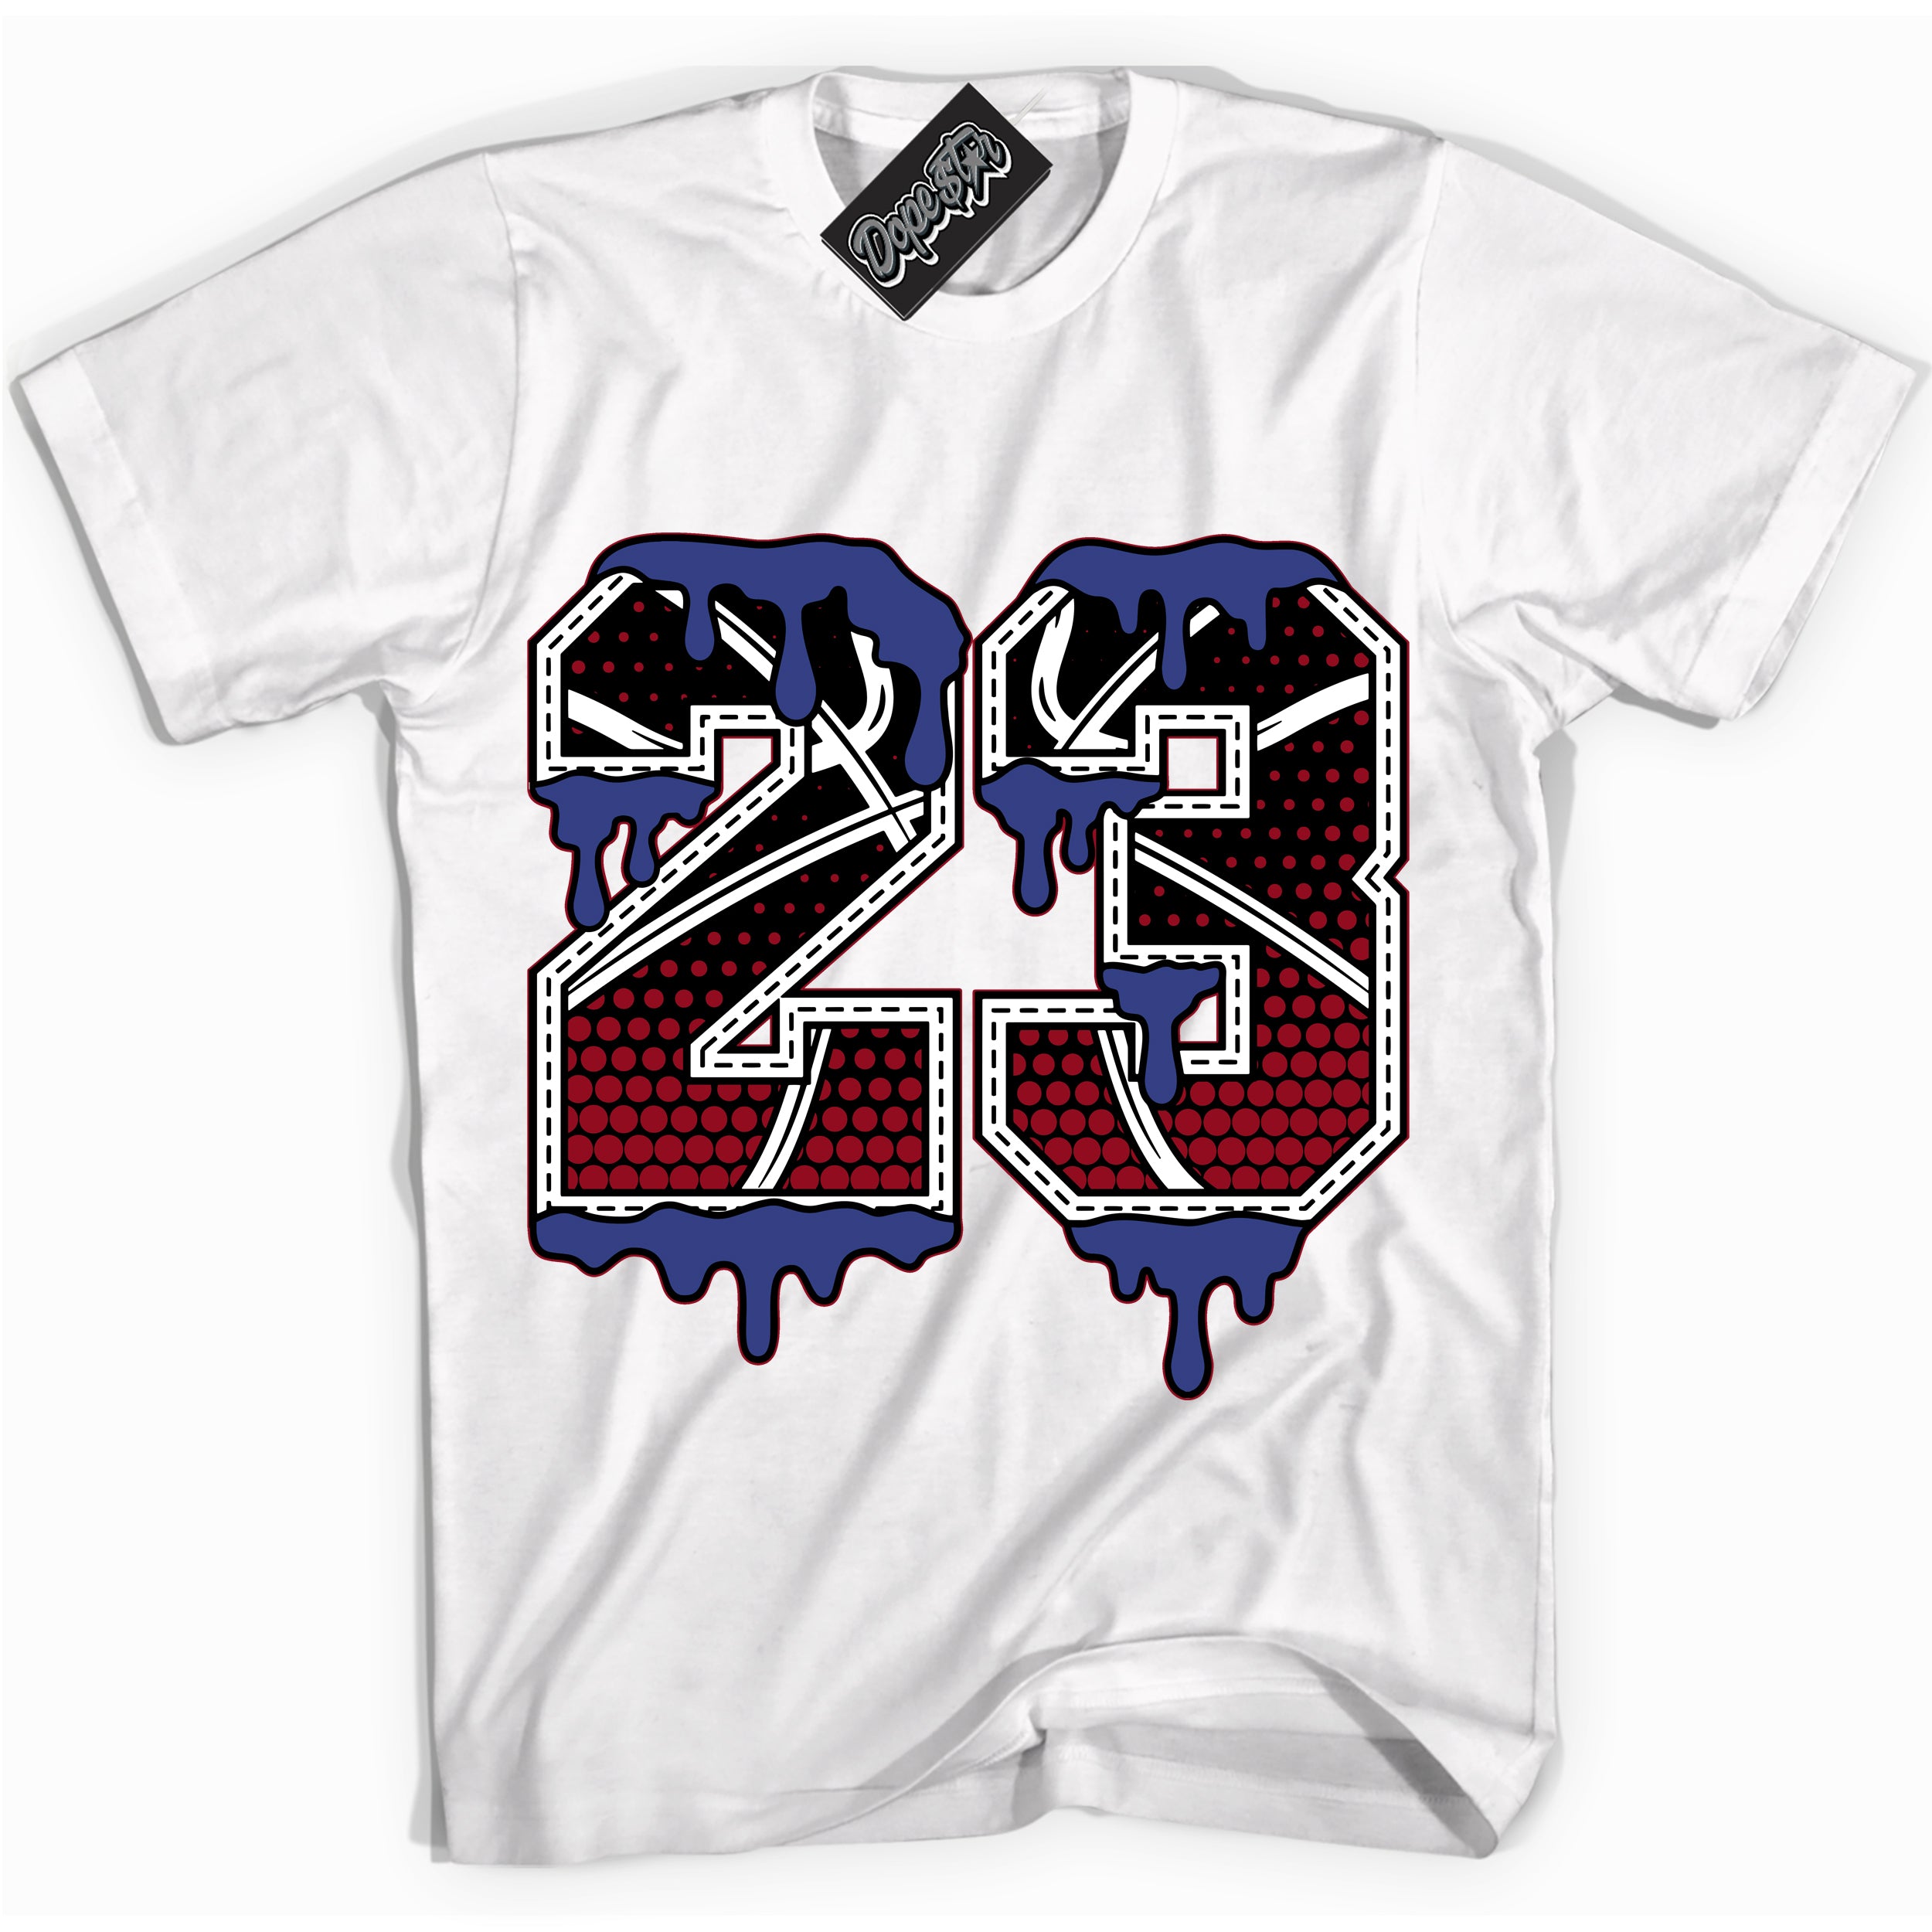 Cool White Shirt with “ 23 Ball ” design that perfectly matches Playoffs 8s Sneakers.